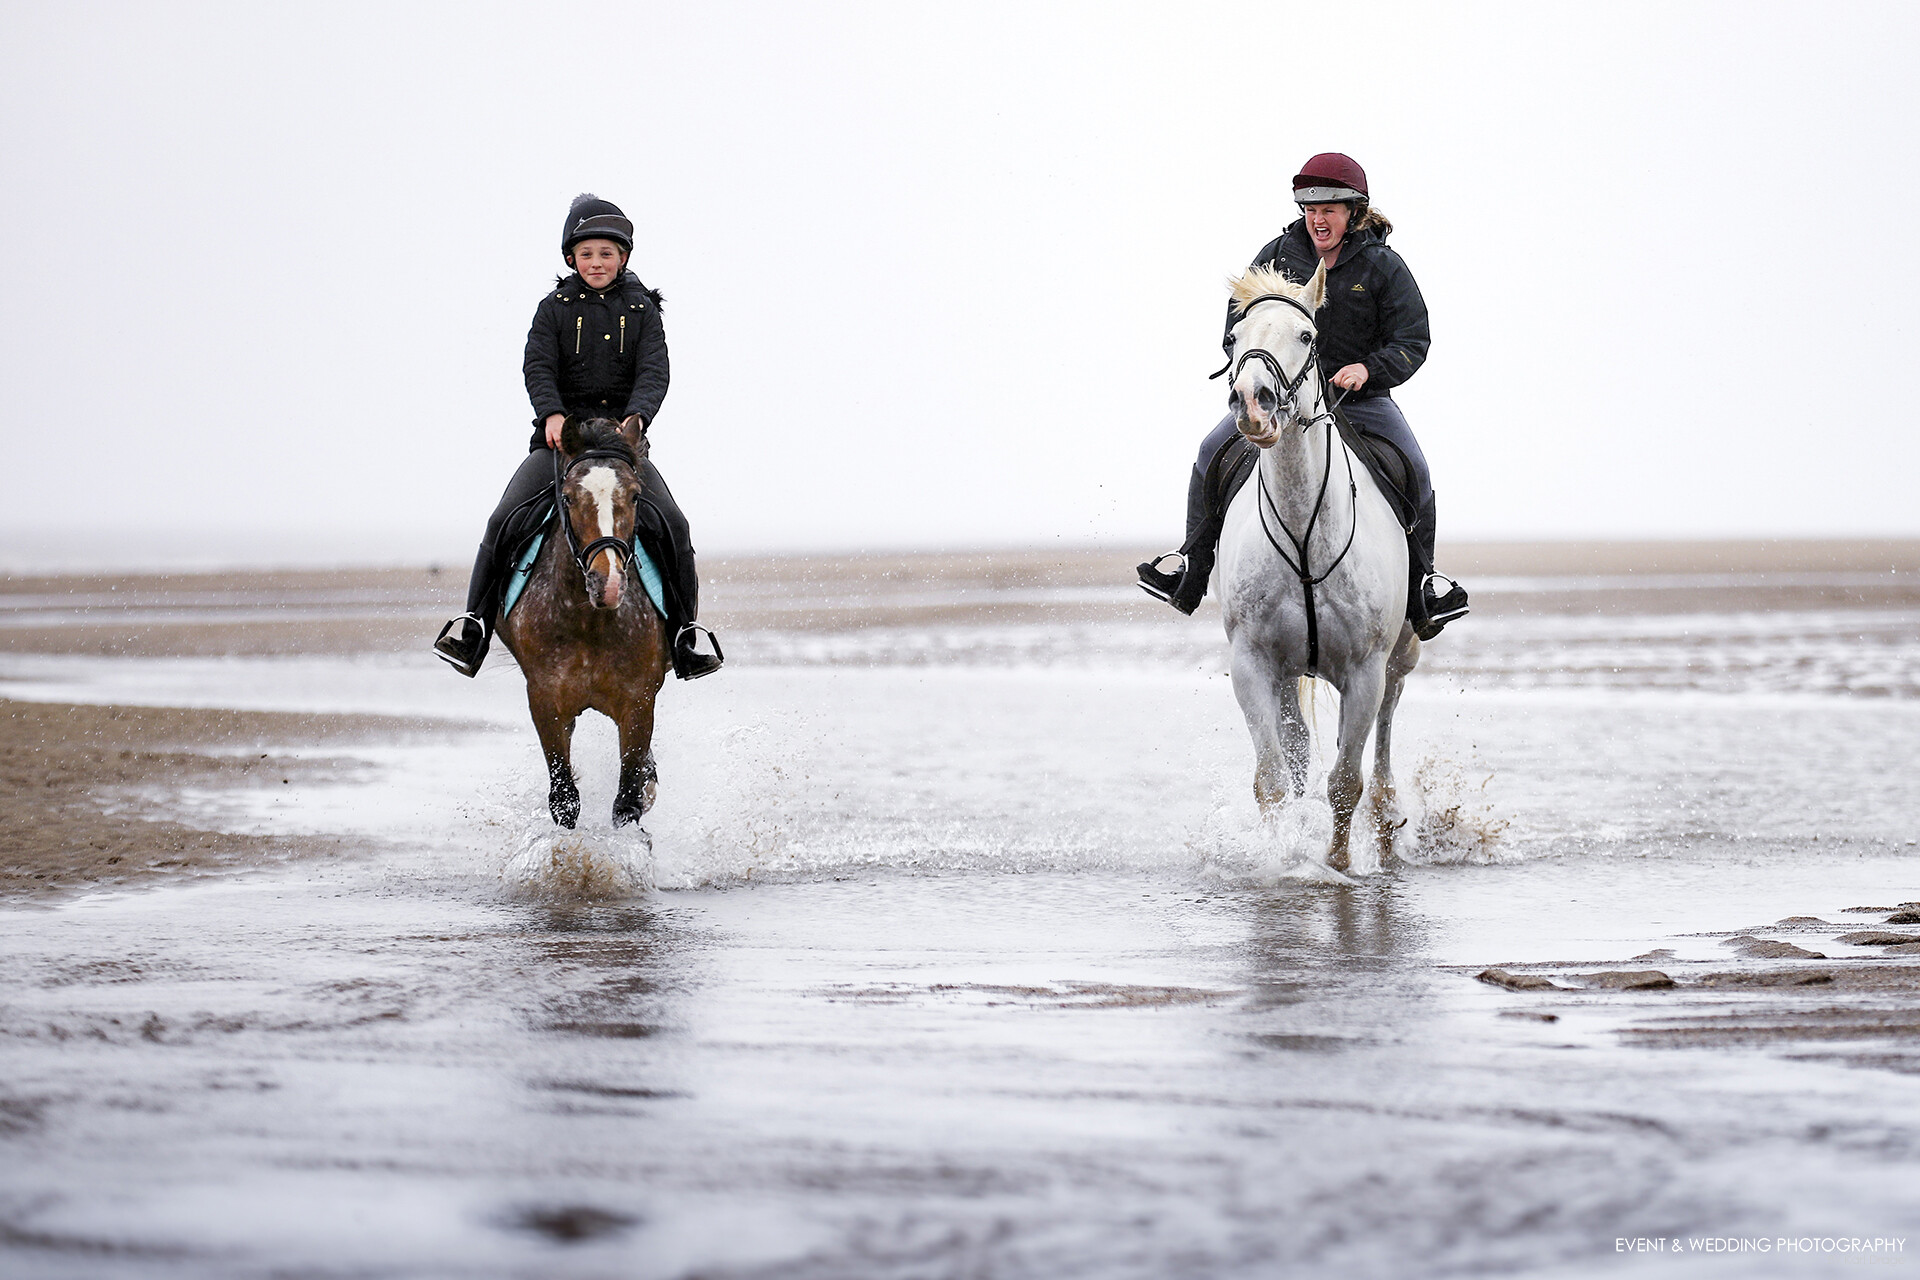 Two horses gallop through a puddle on the beach